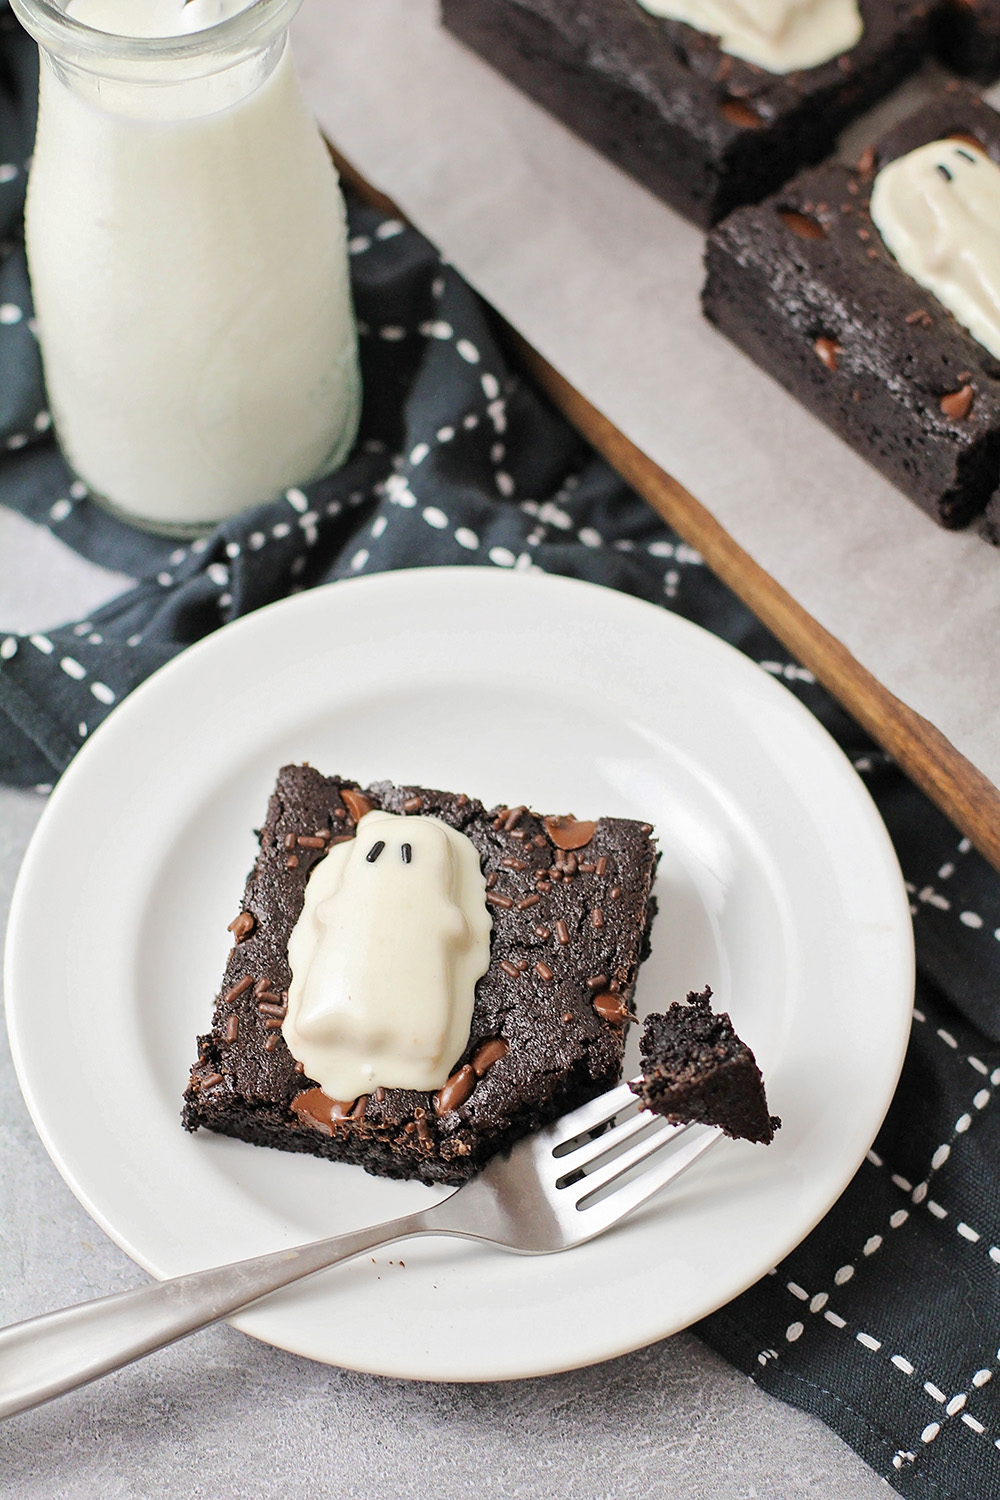 These Halloween ghost brownies are so adorable, and so rich and decadent! They’re the perfect Halloween dessert!